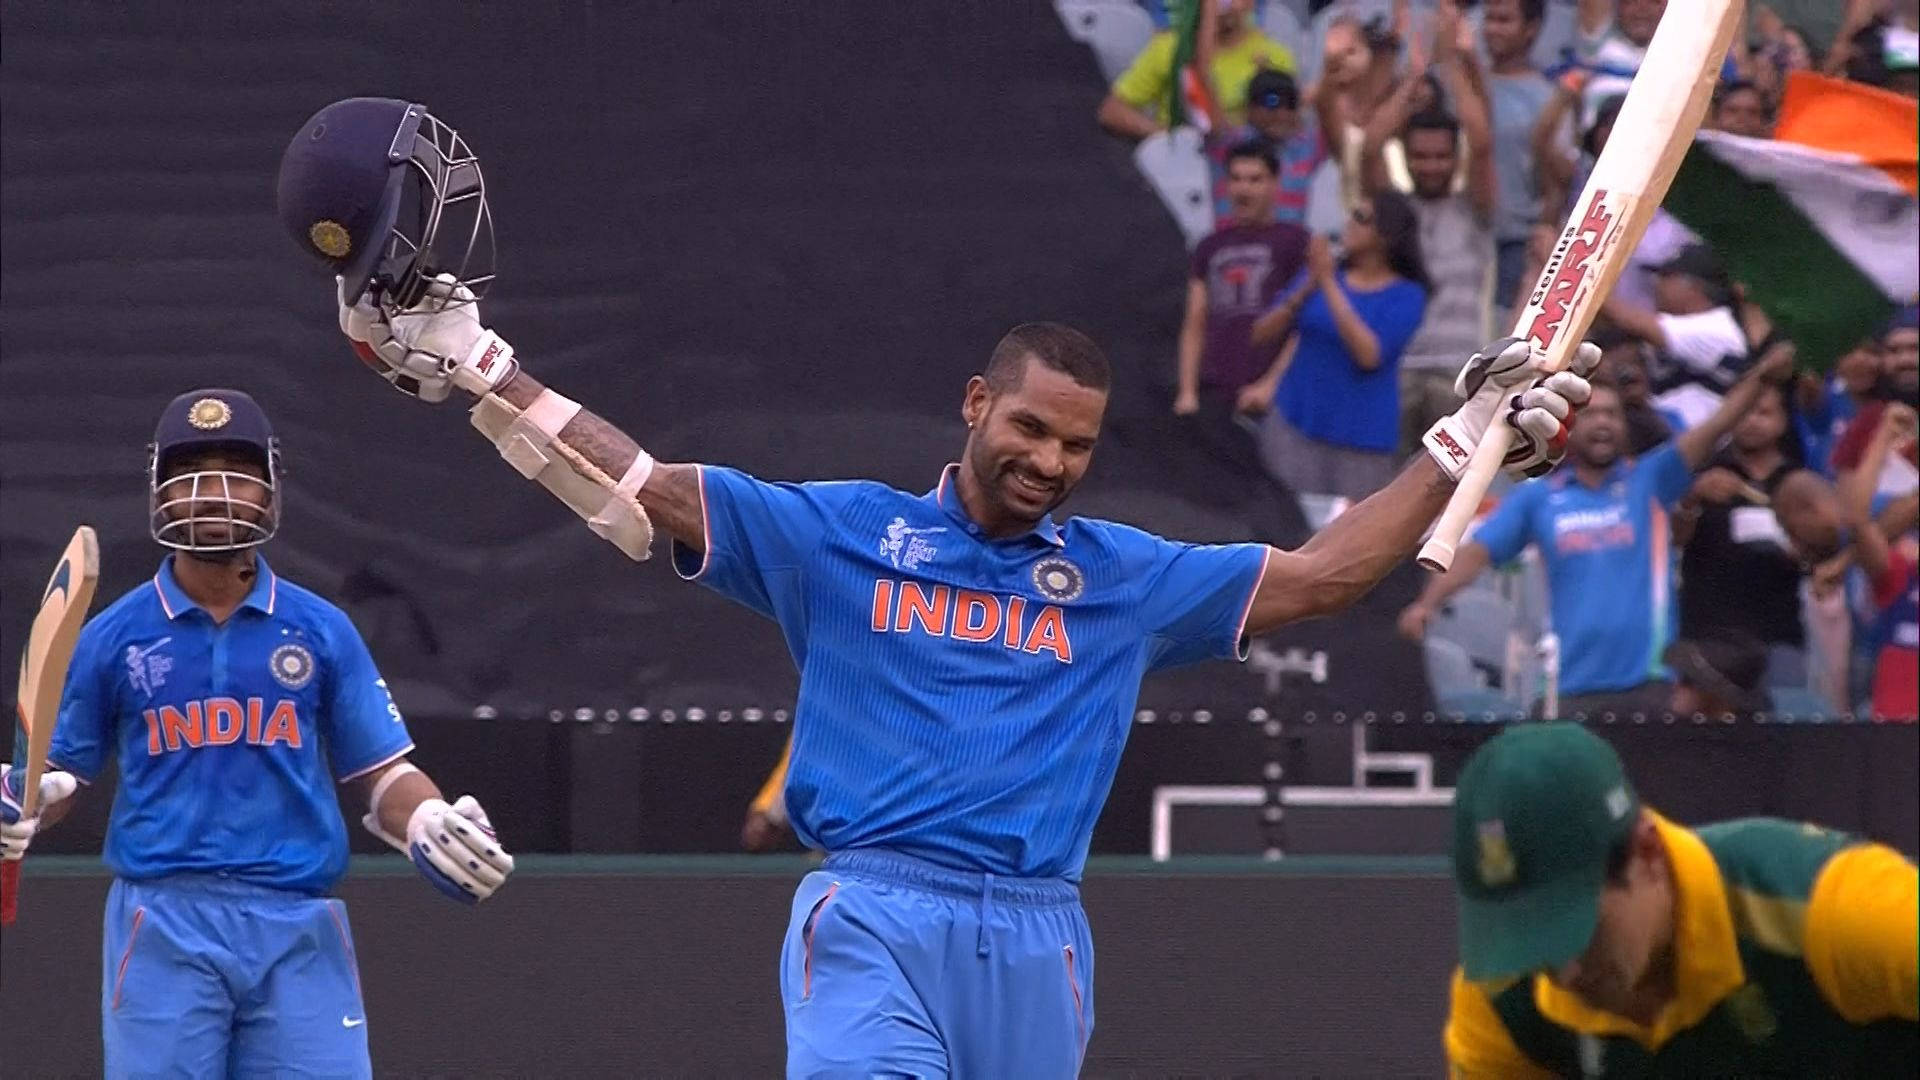 Shikhar Dhawan Open Arms Background